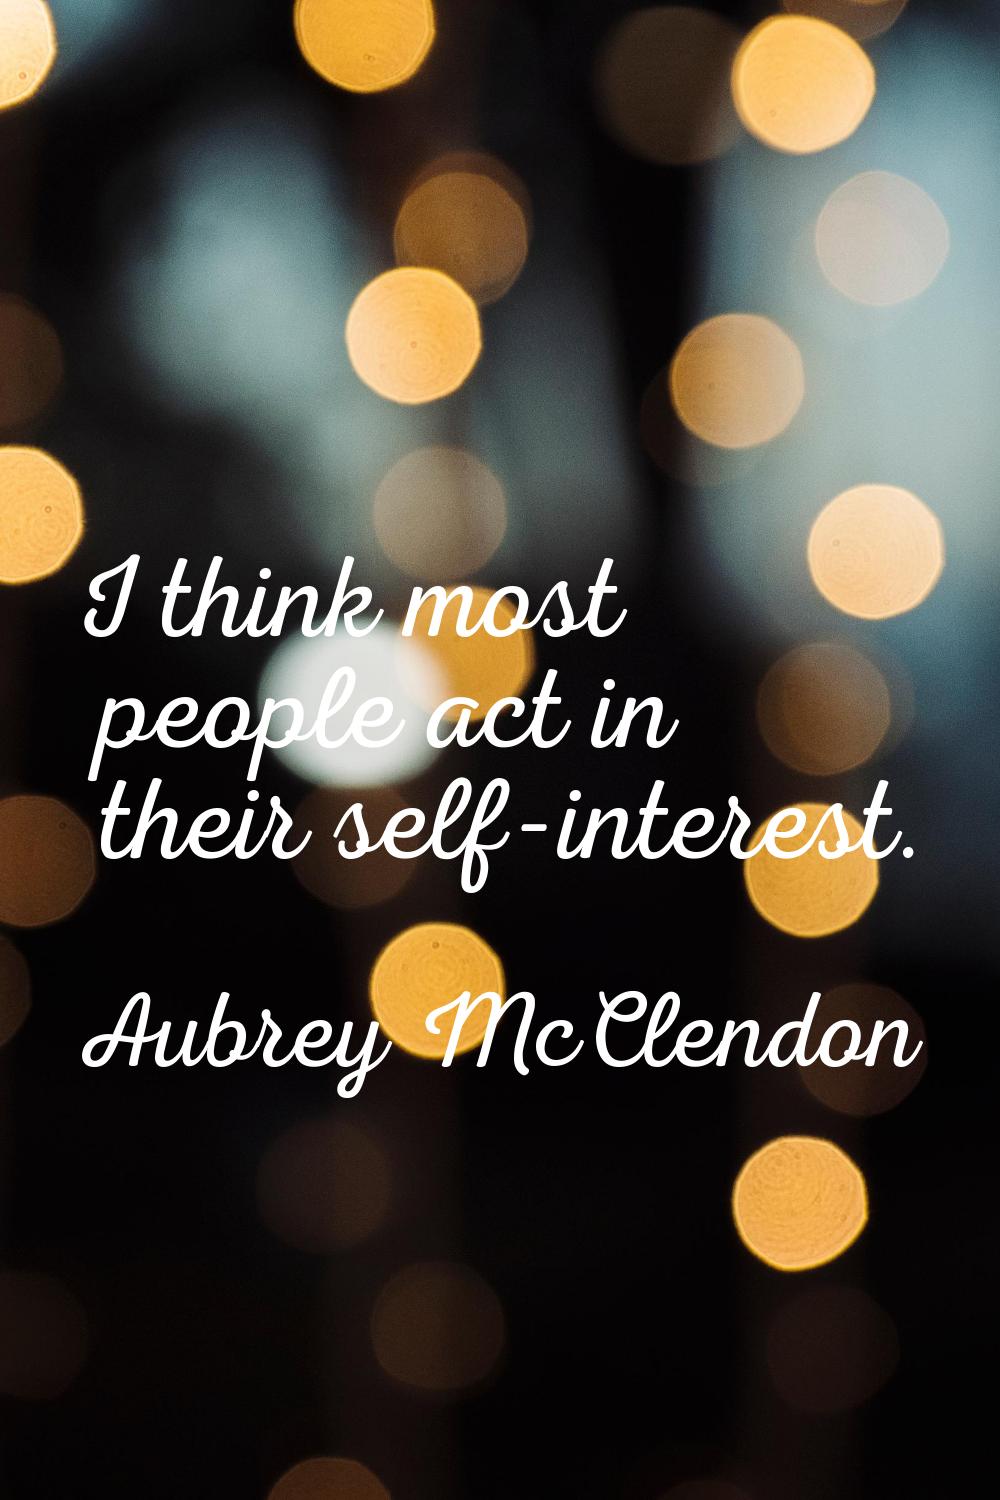 I think most people act in their self-interest.